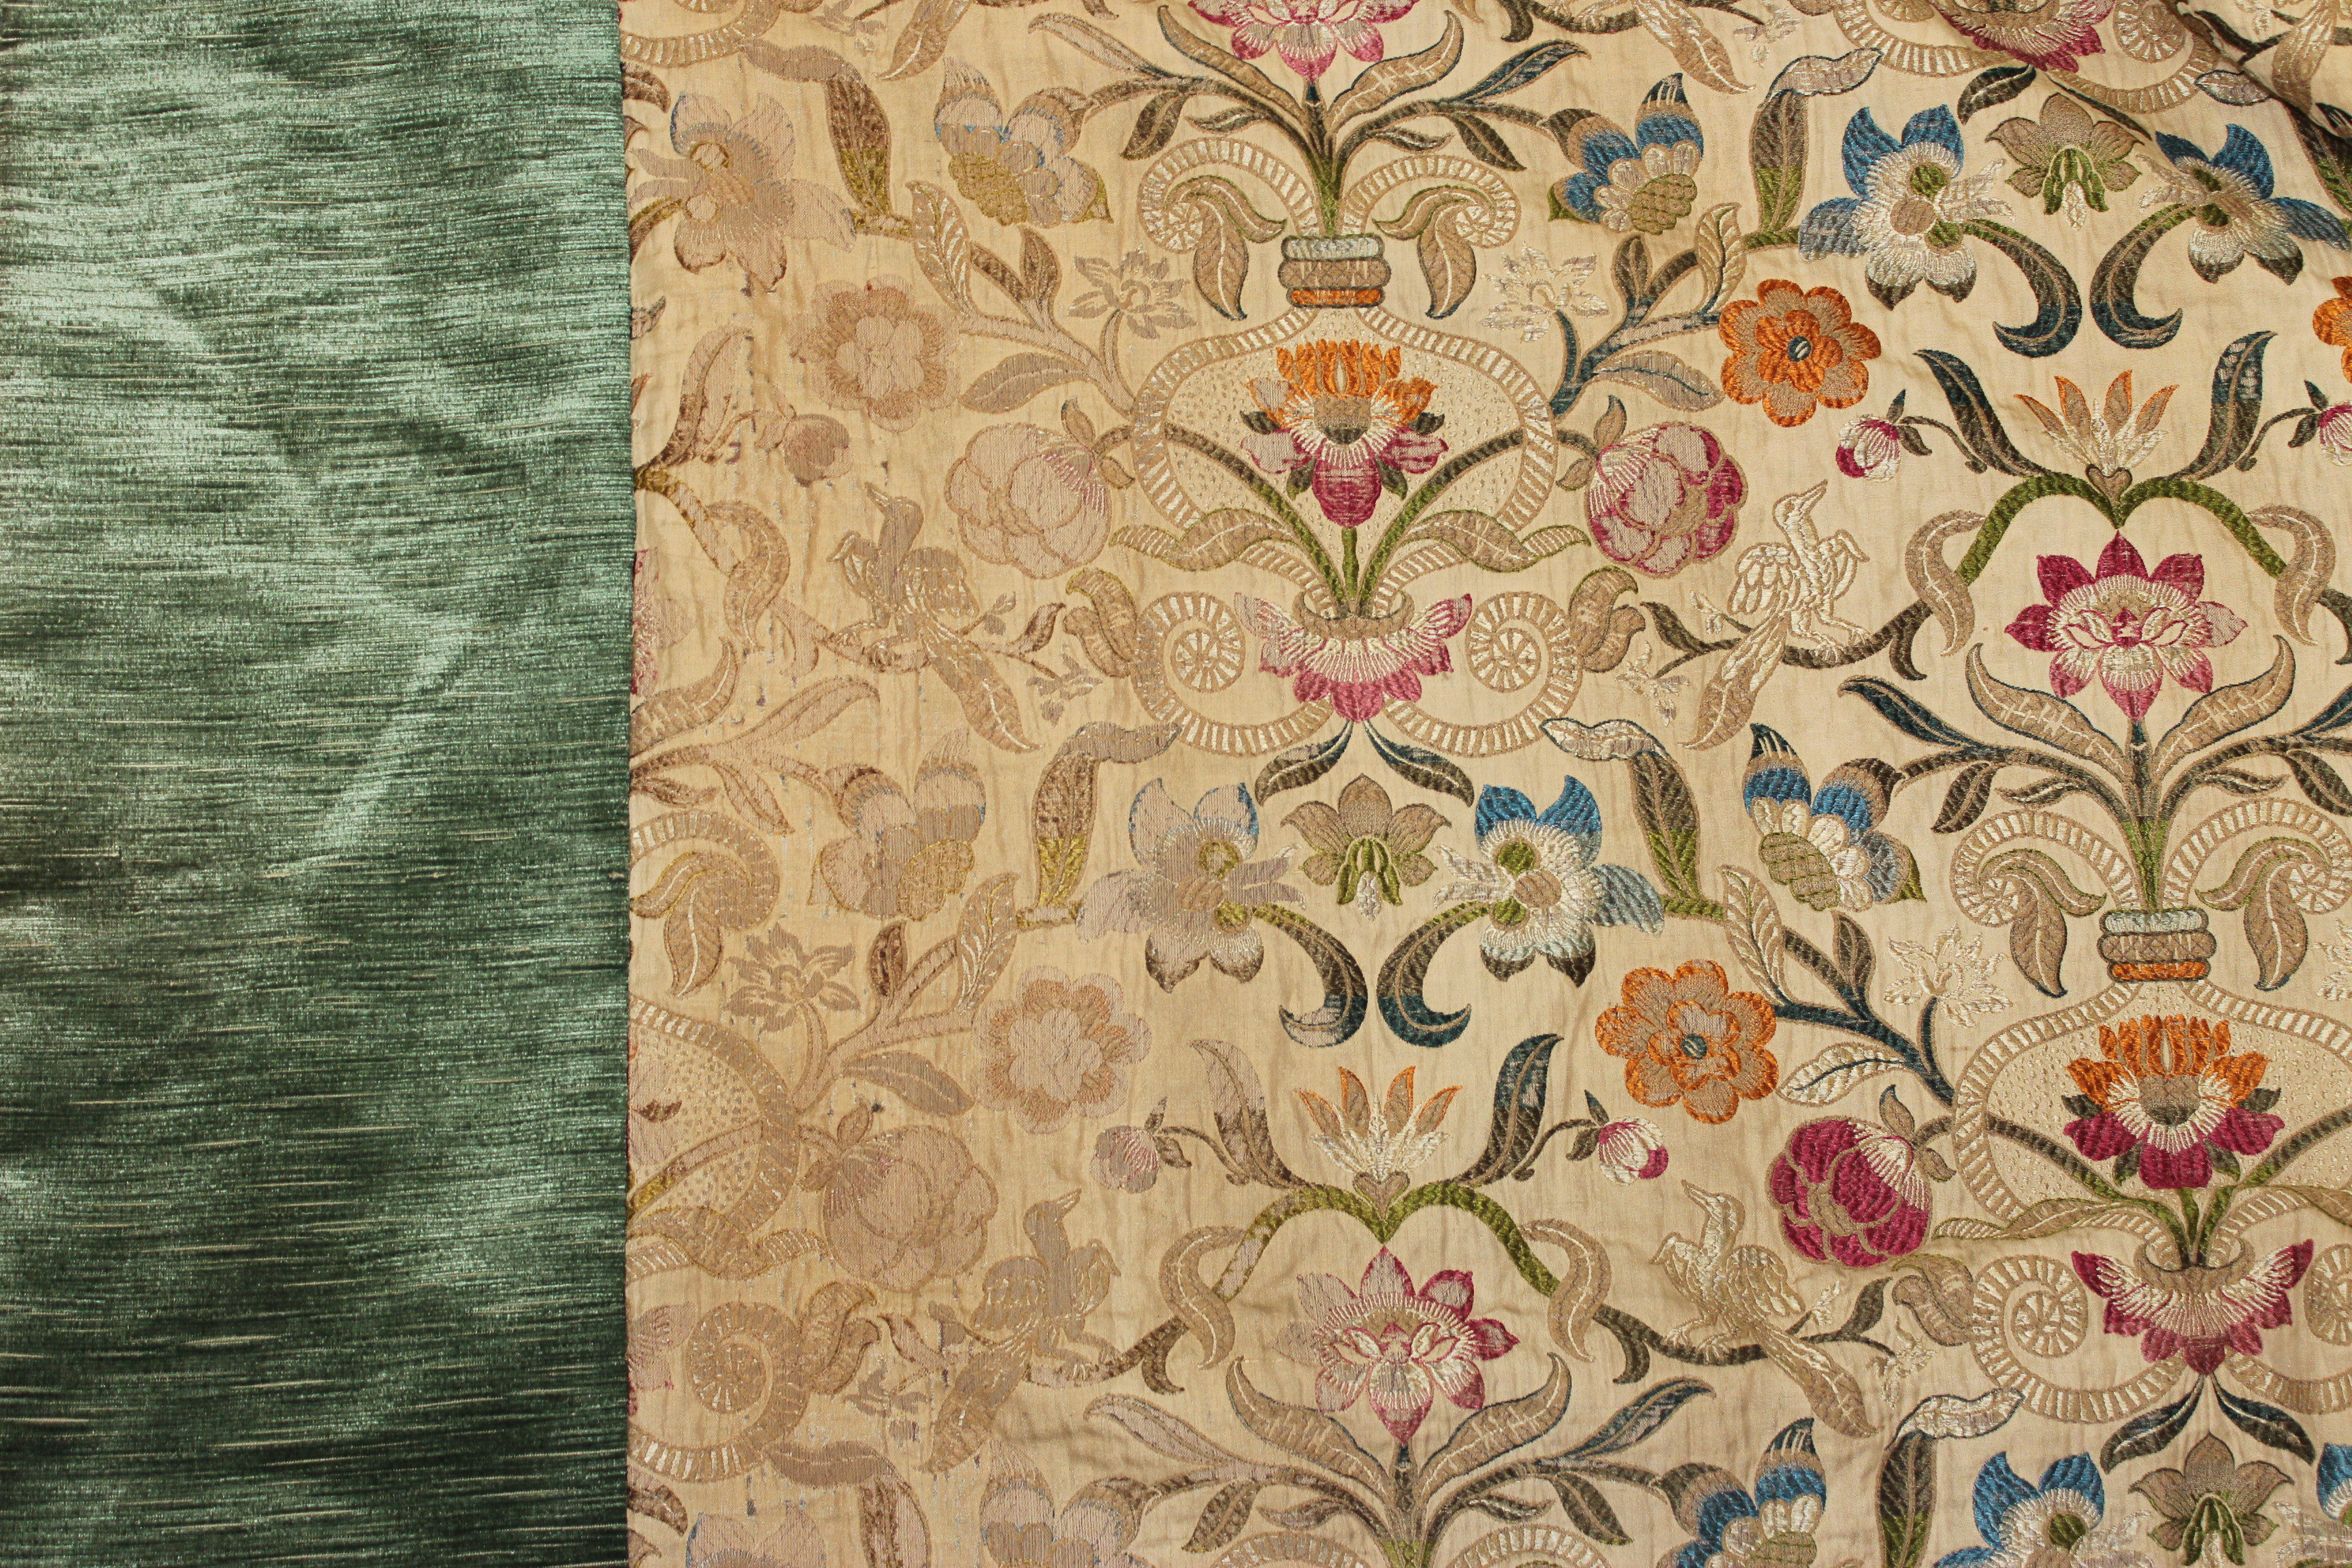 A SET OF FOUR PAIRS OF 17TH CENTURY FLEMISH STYLE CURTAINS with polychrome needlework bird and